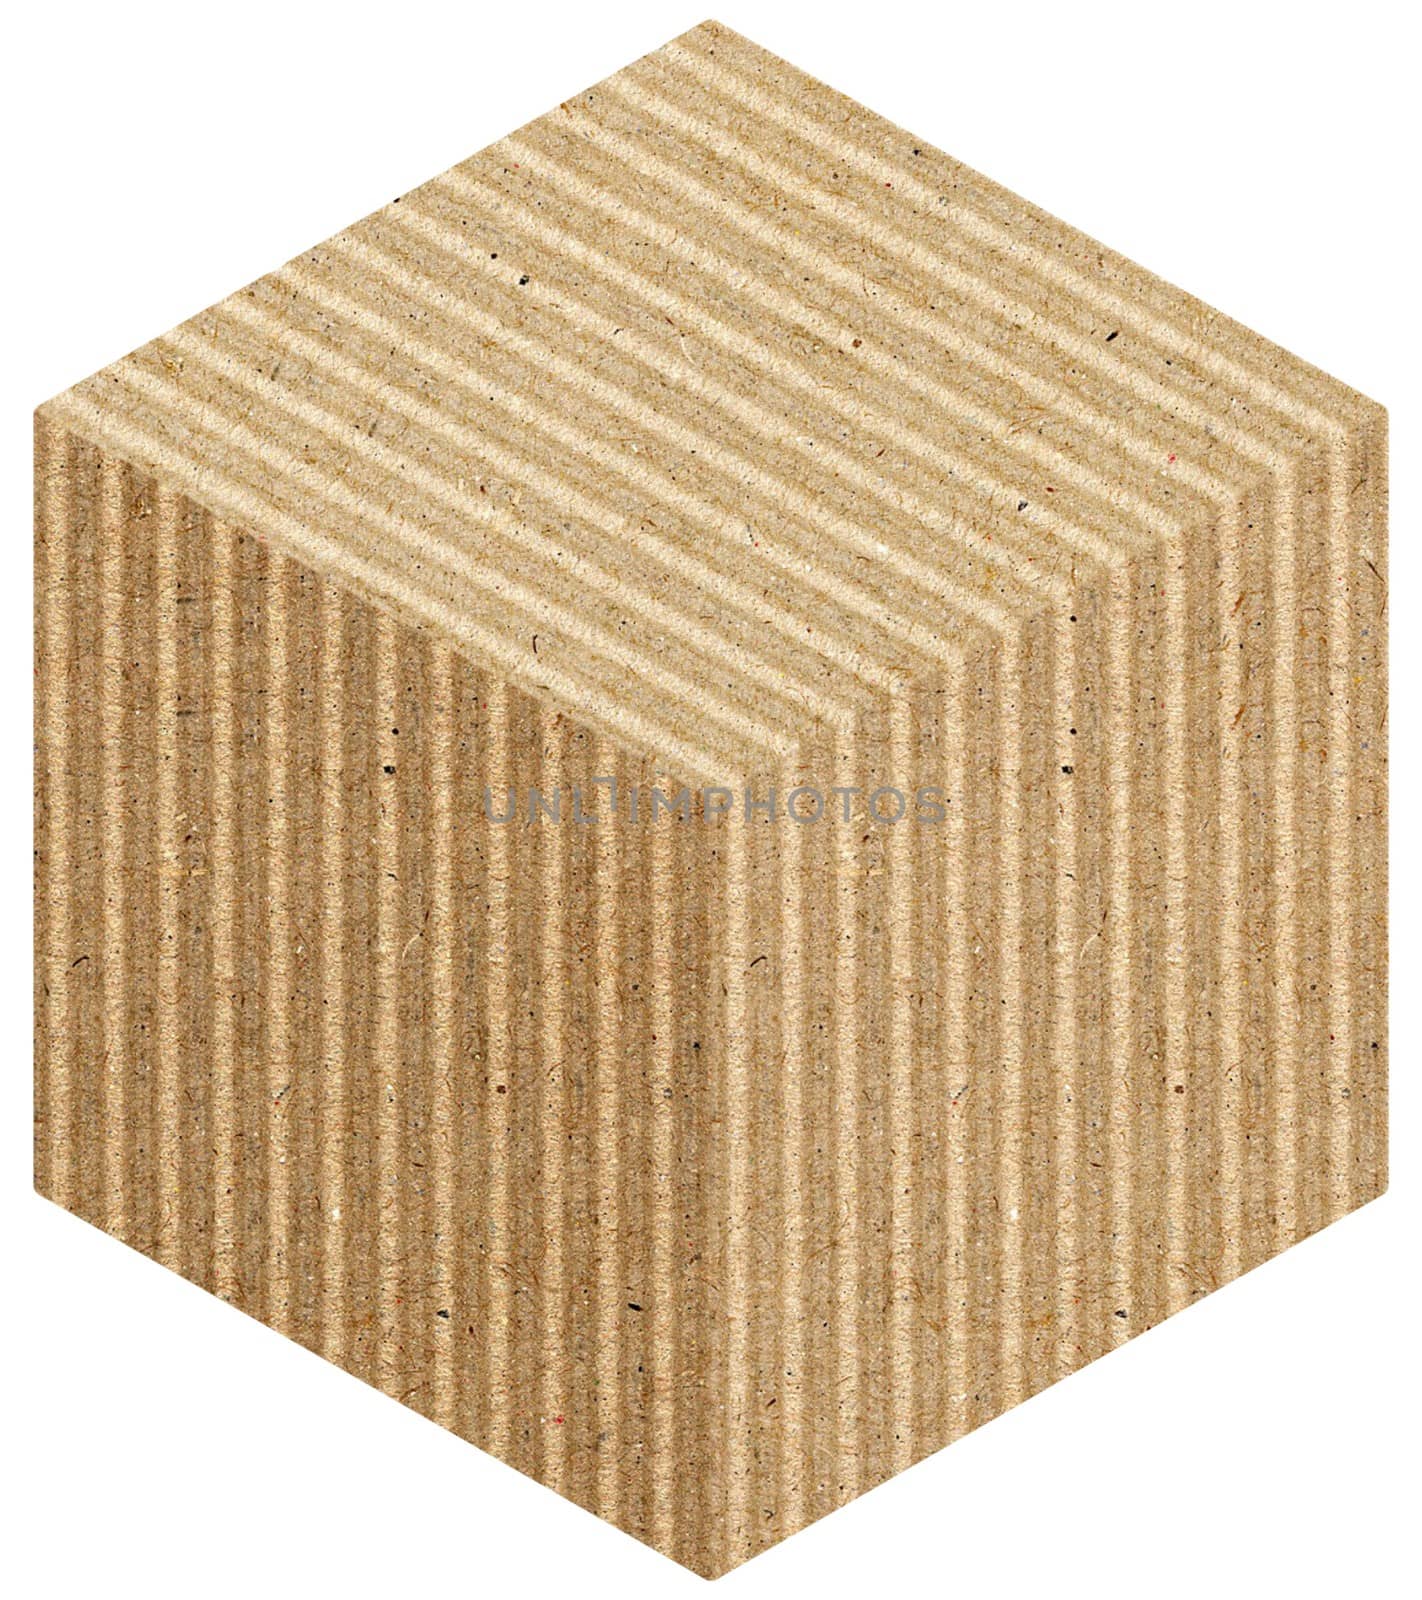 brown corrugated cardboard cube isolated over white background